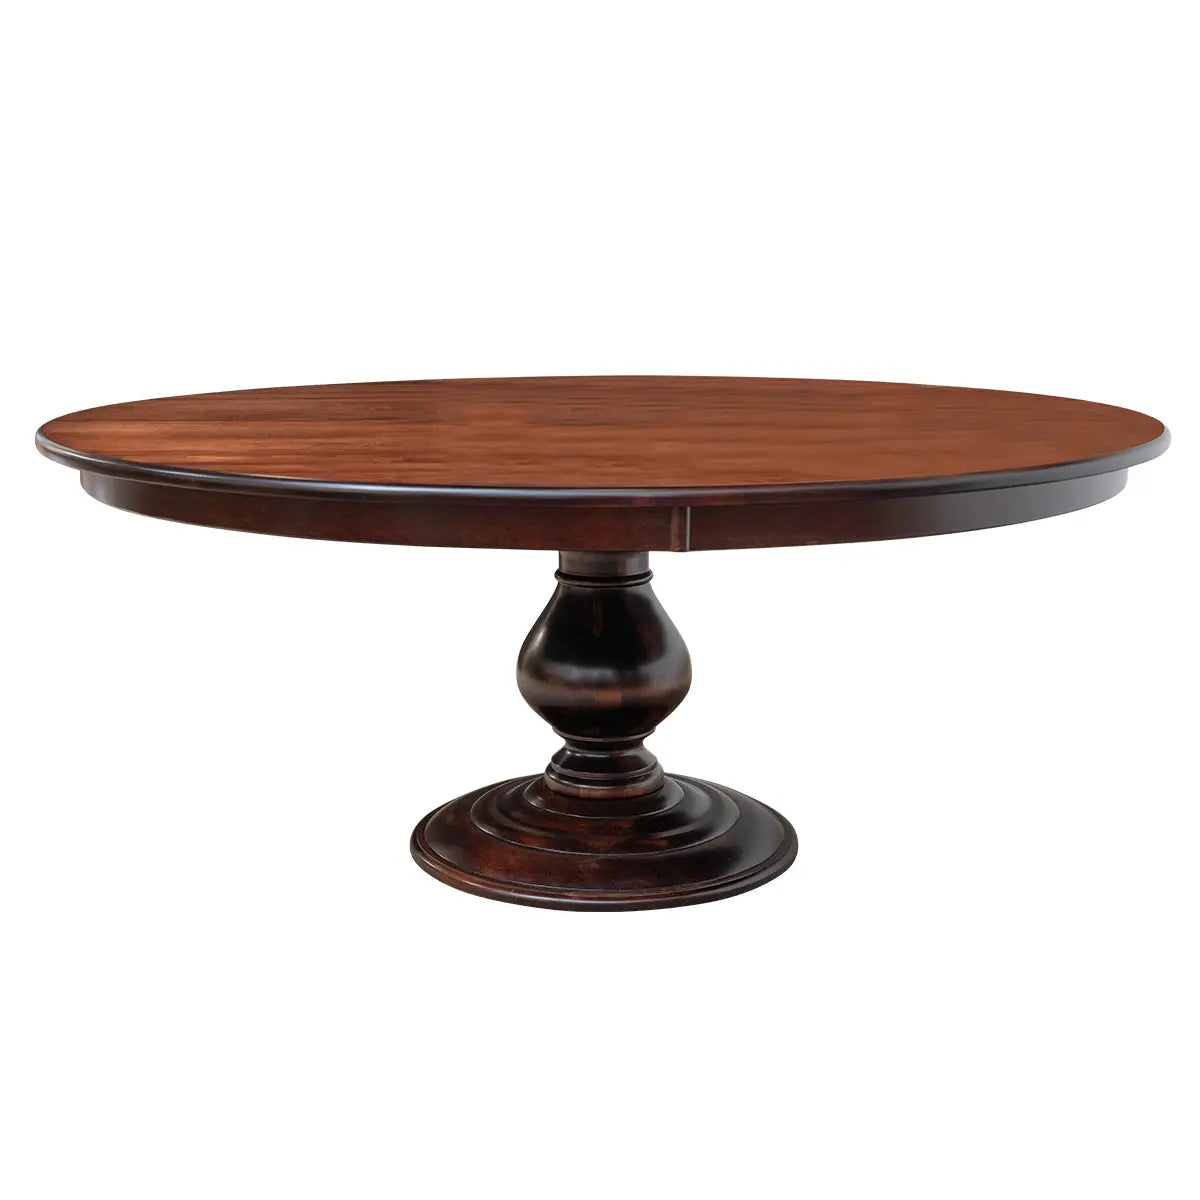 Foles Round Maple wood Pedestal Dining TAble